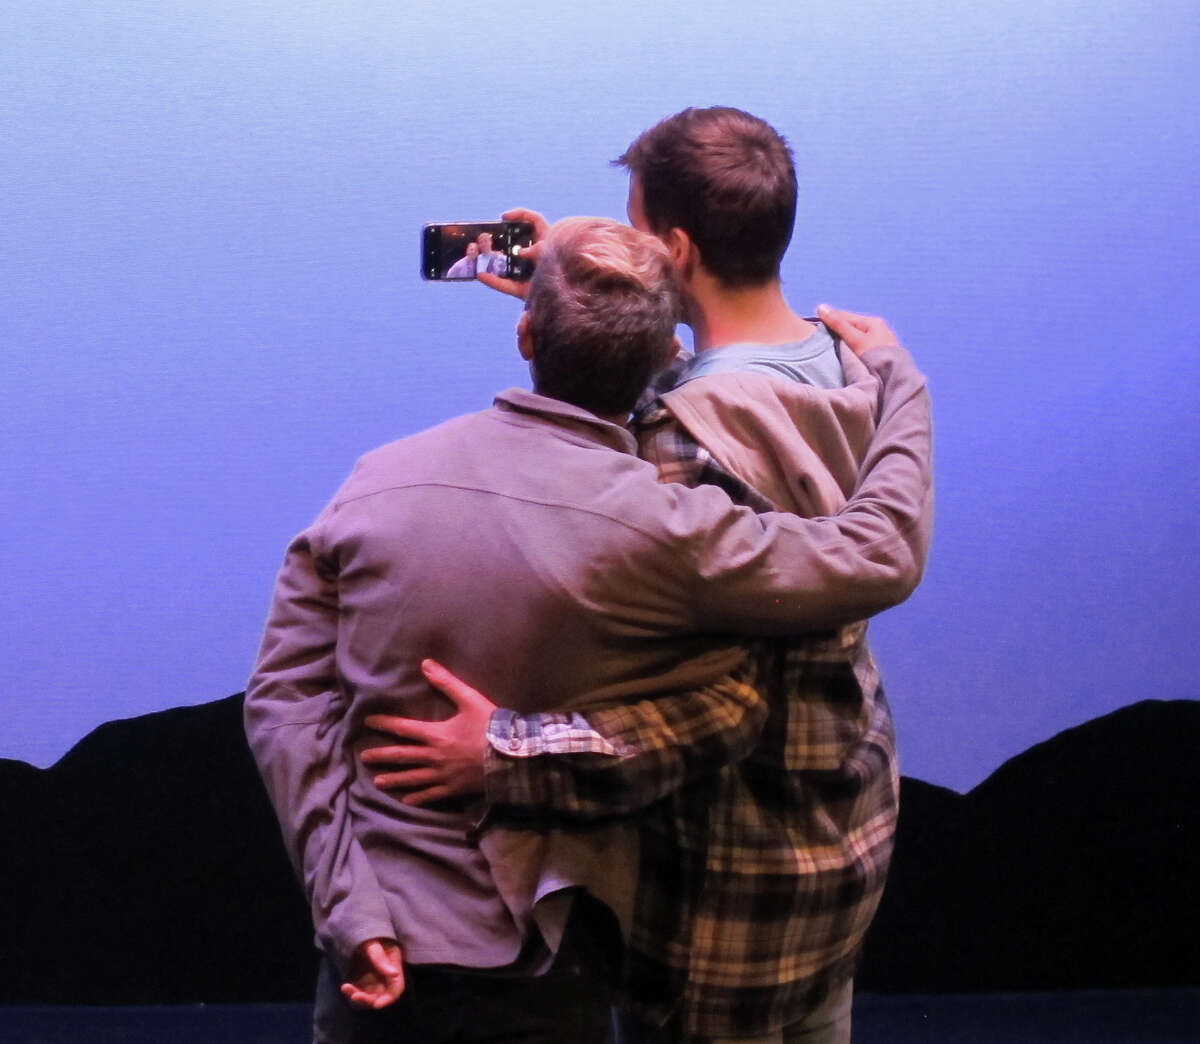  Hunter Ringsmith, left, and Brian Patterson in "Clarkston," running at Bridge Street Theatre in Catskill through May 8, 2022.